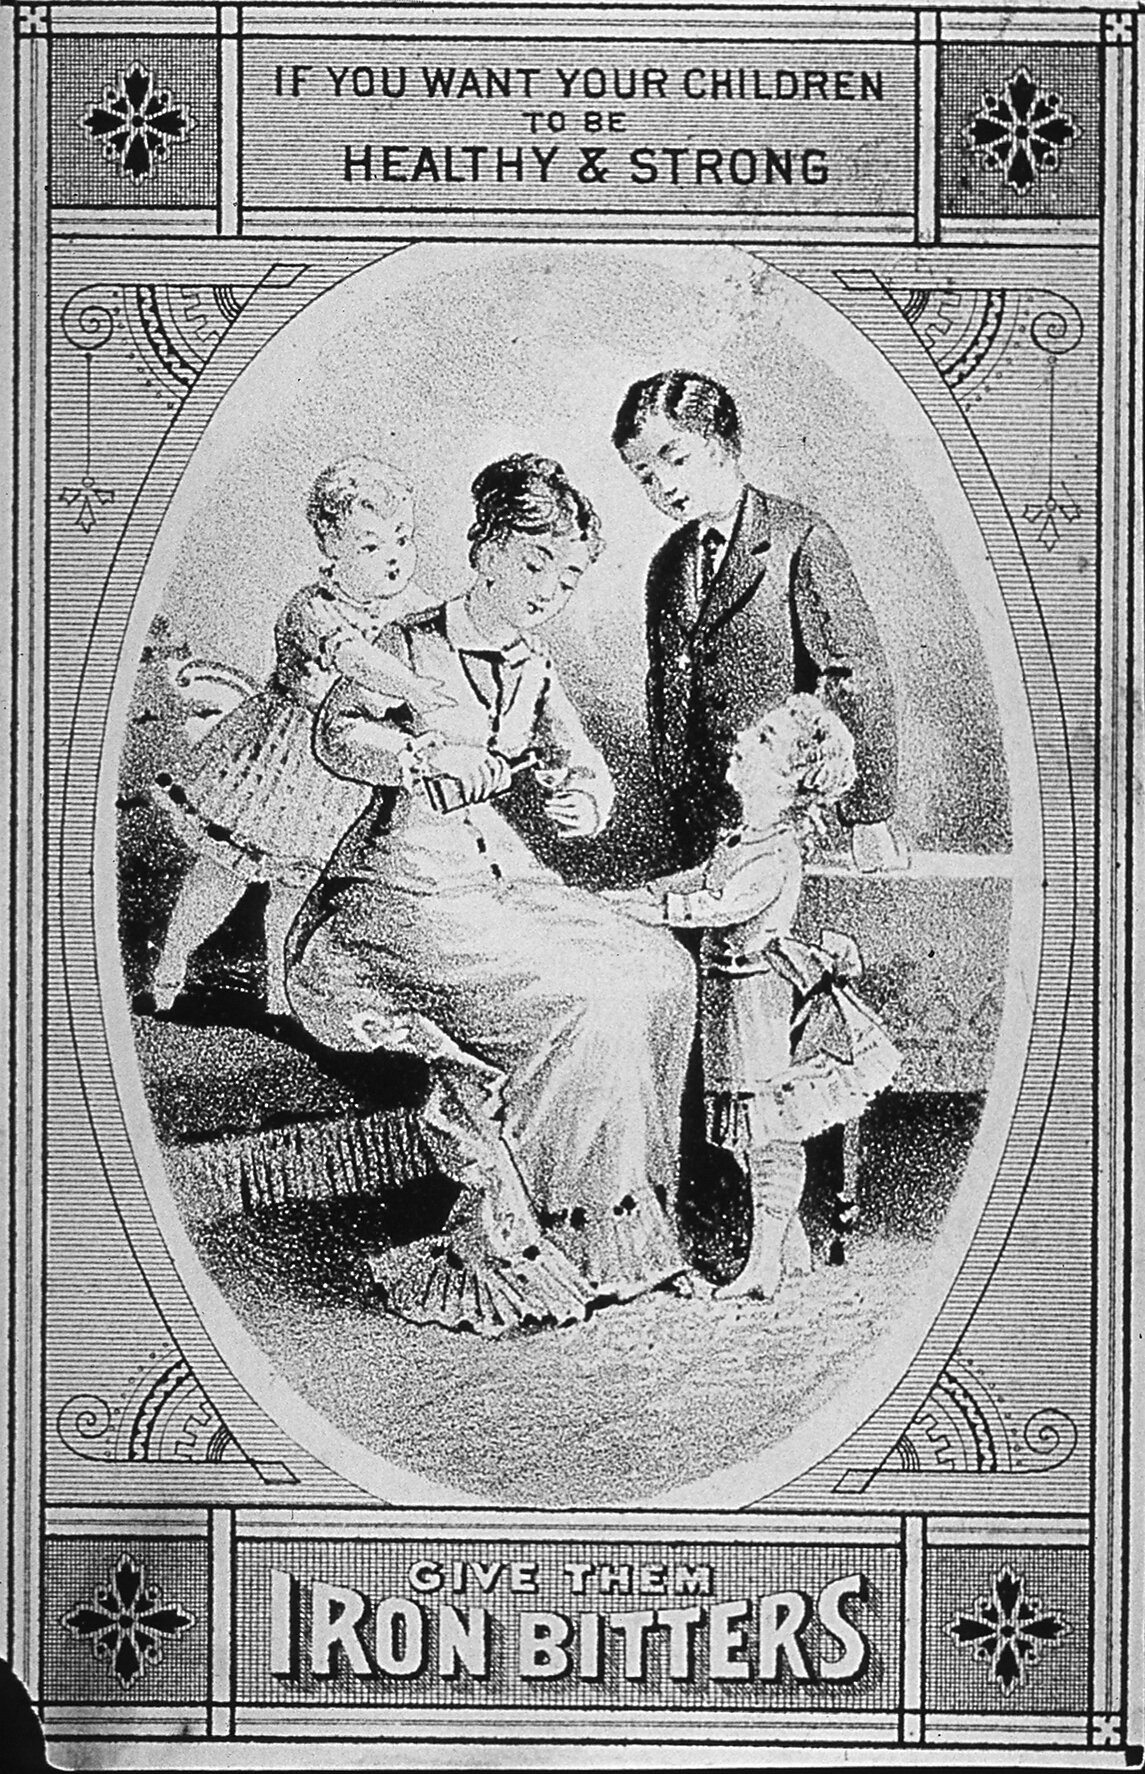 Advertisement for Brown's Iron Bitters (which contained cocaine) featuring a woman pouring a dose of Iron Bitters surrounded by three children.